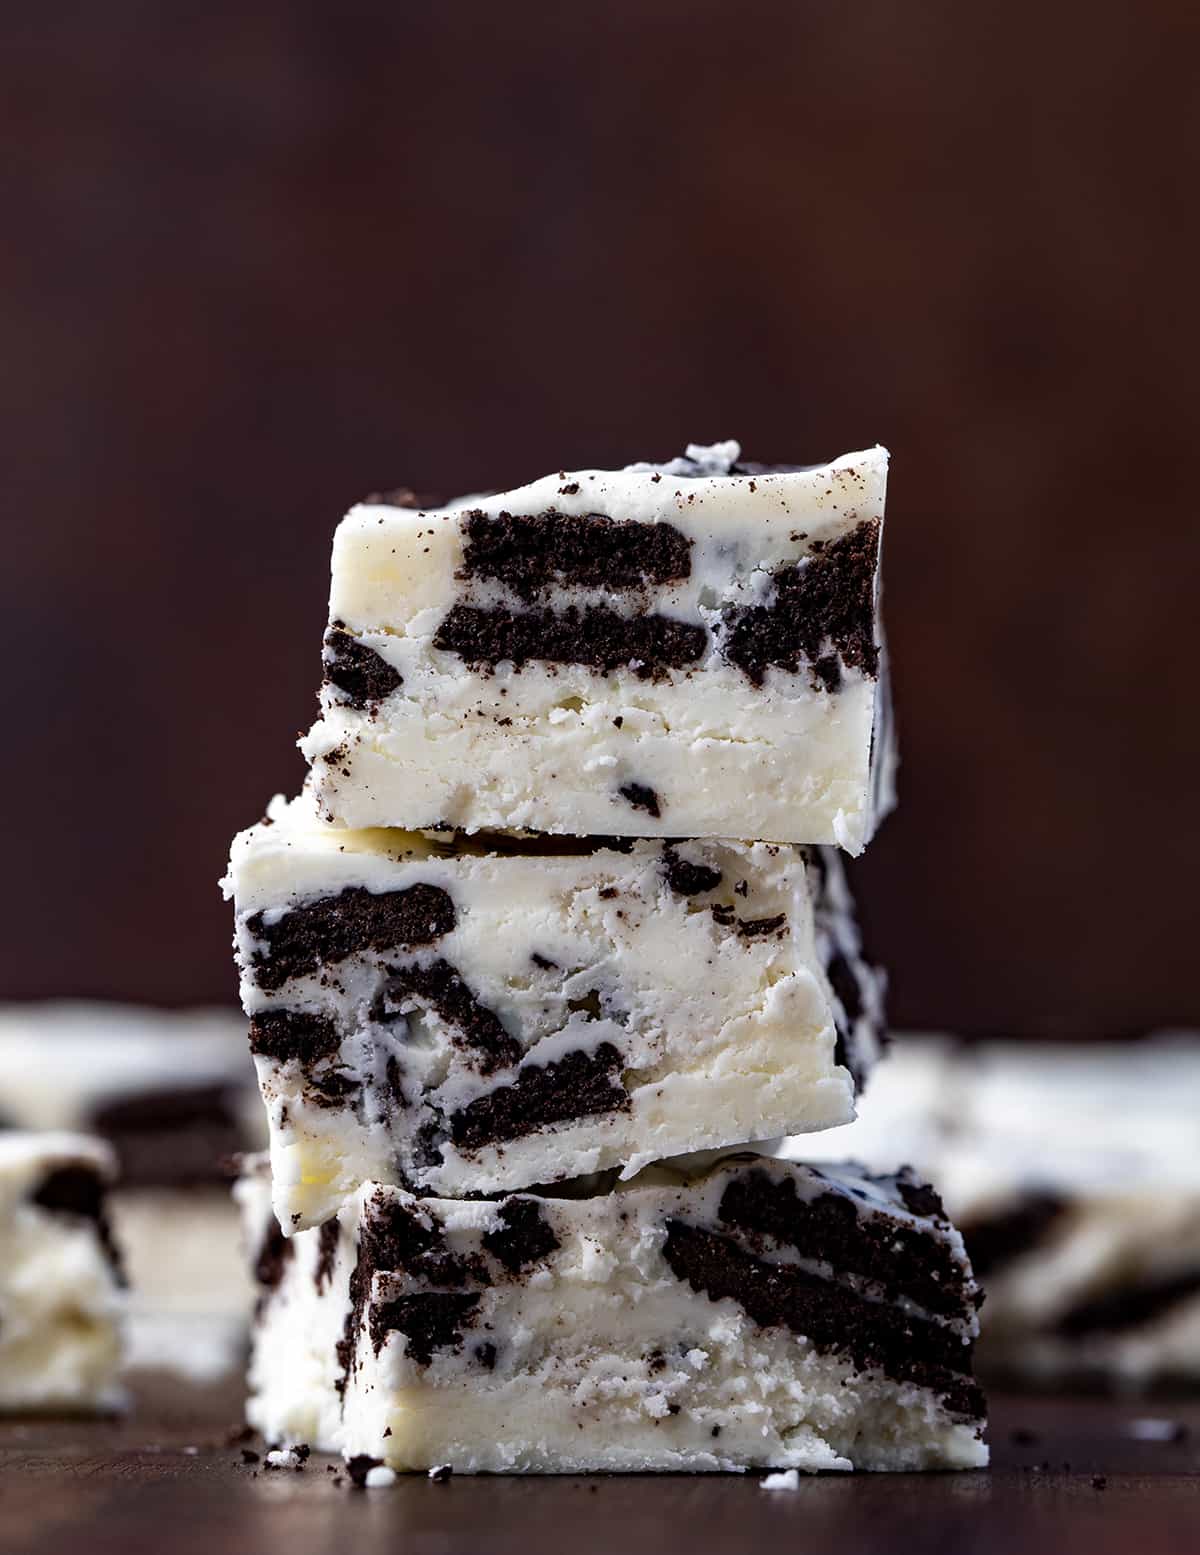 Stack of Cookies and Cream Fudge on a Dark Cutting Board.